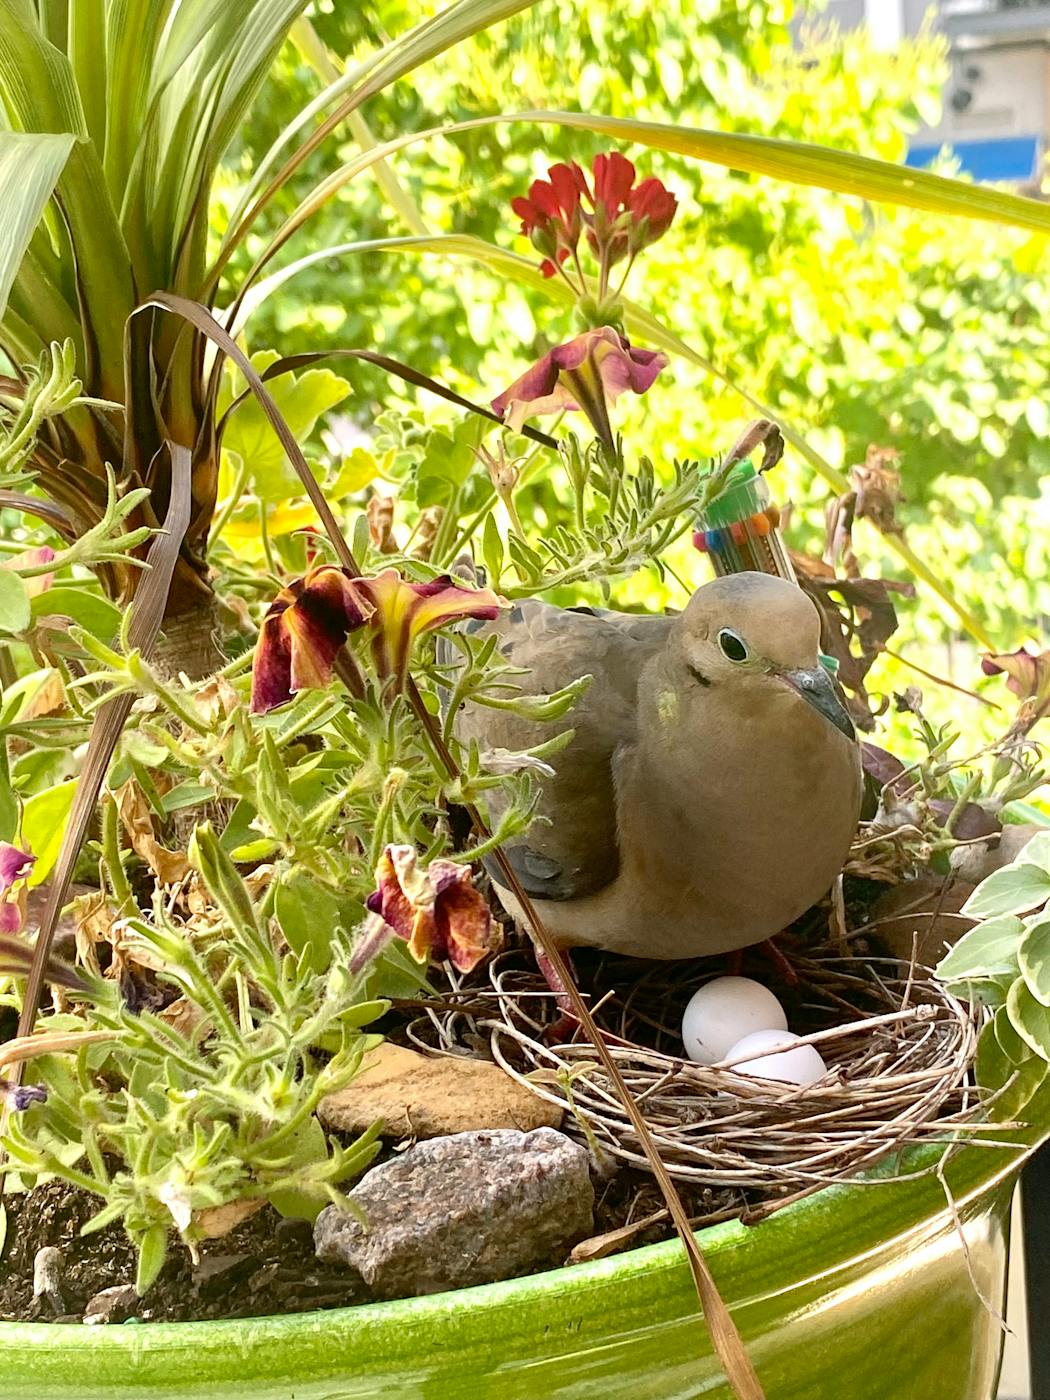 The mourning dove tends its nest.